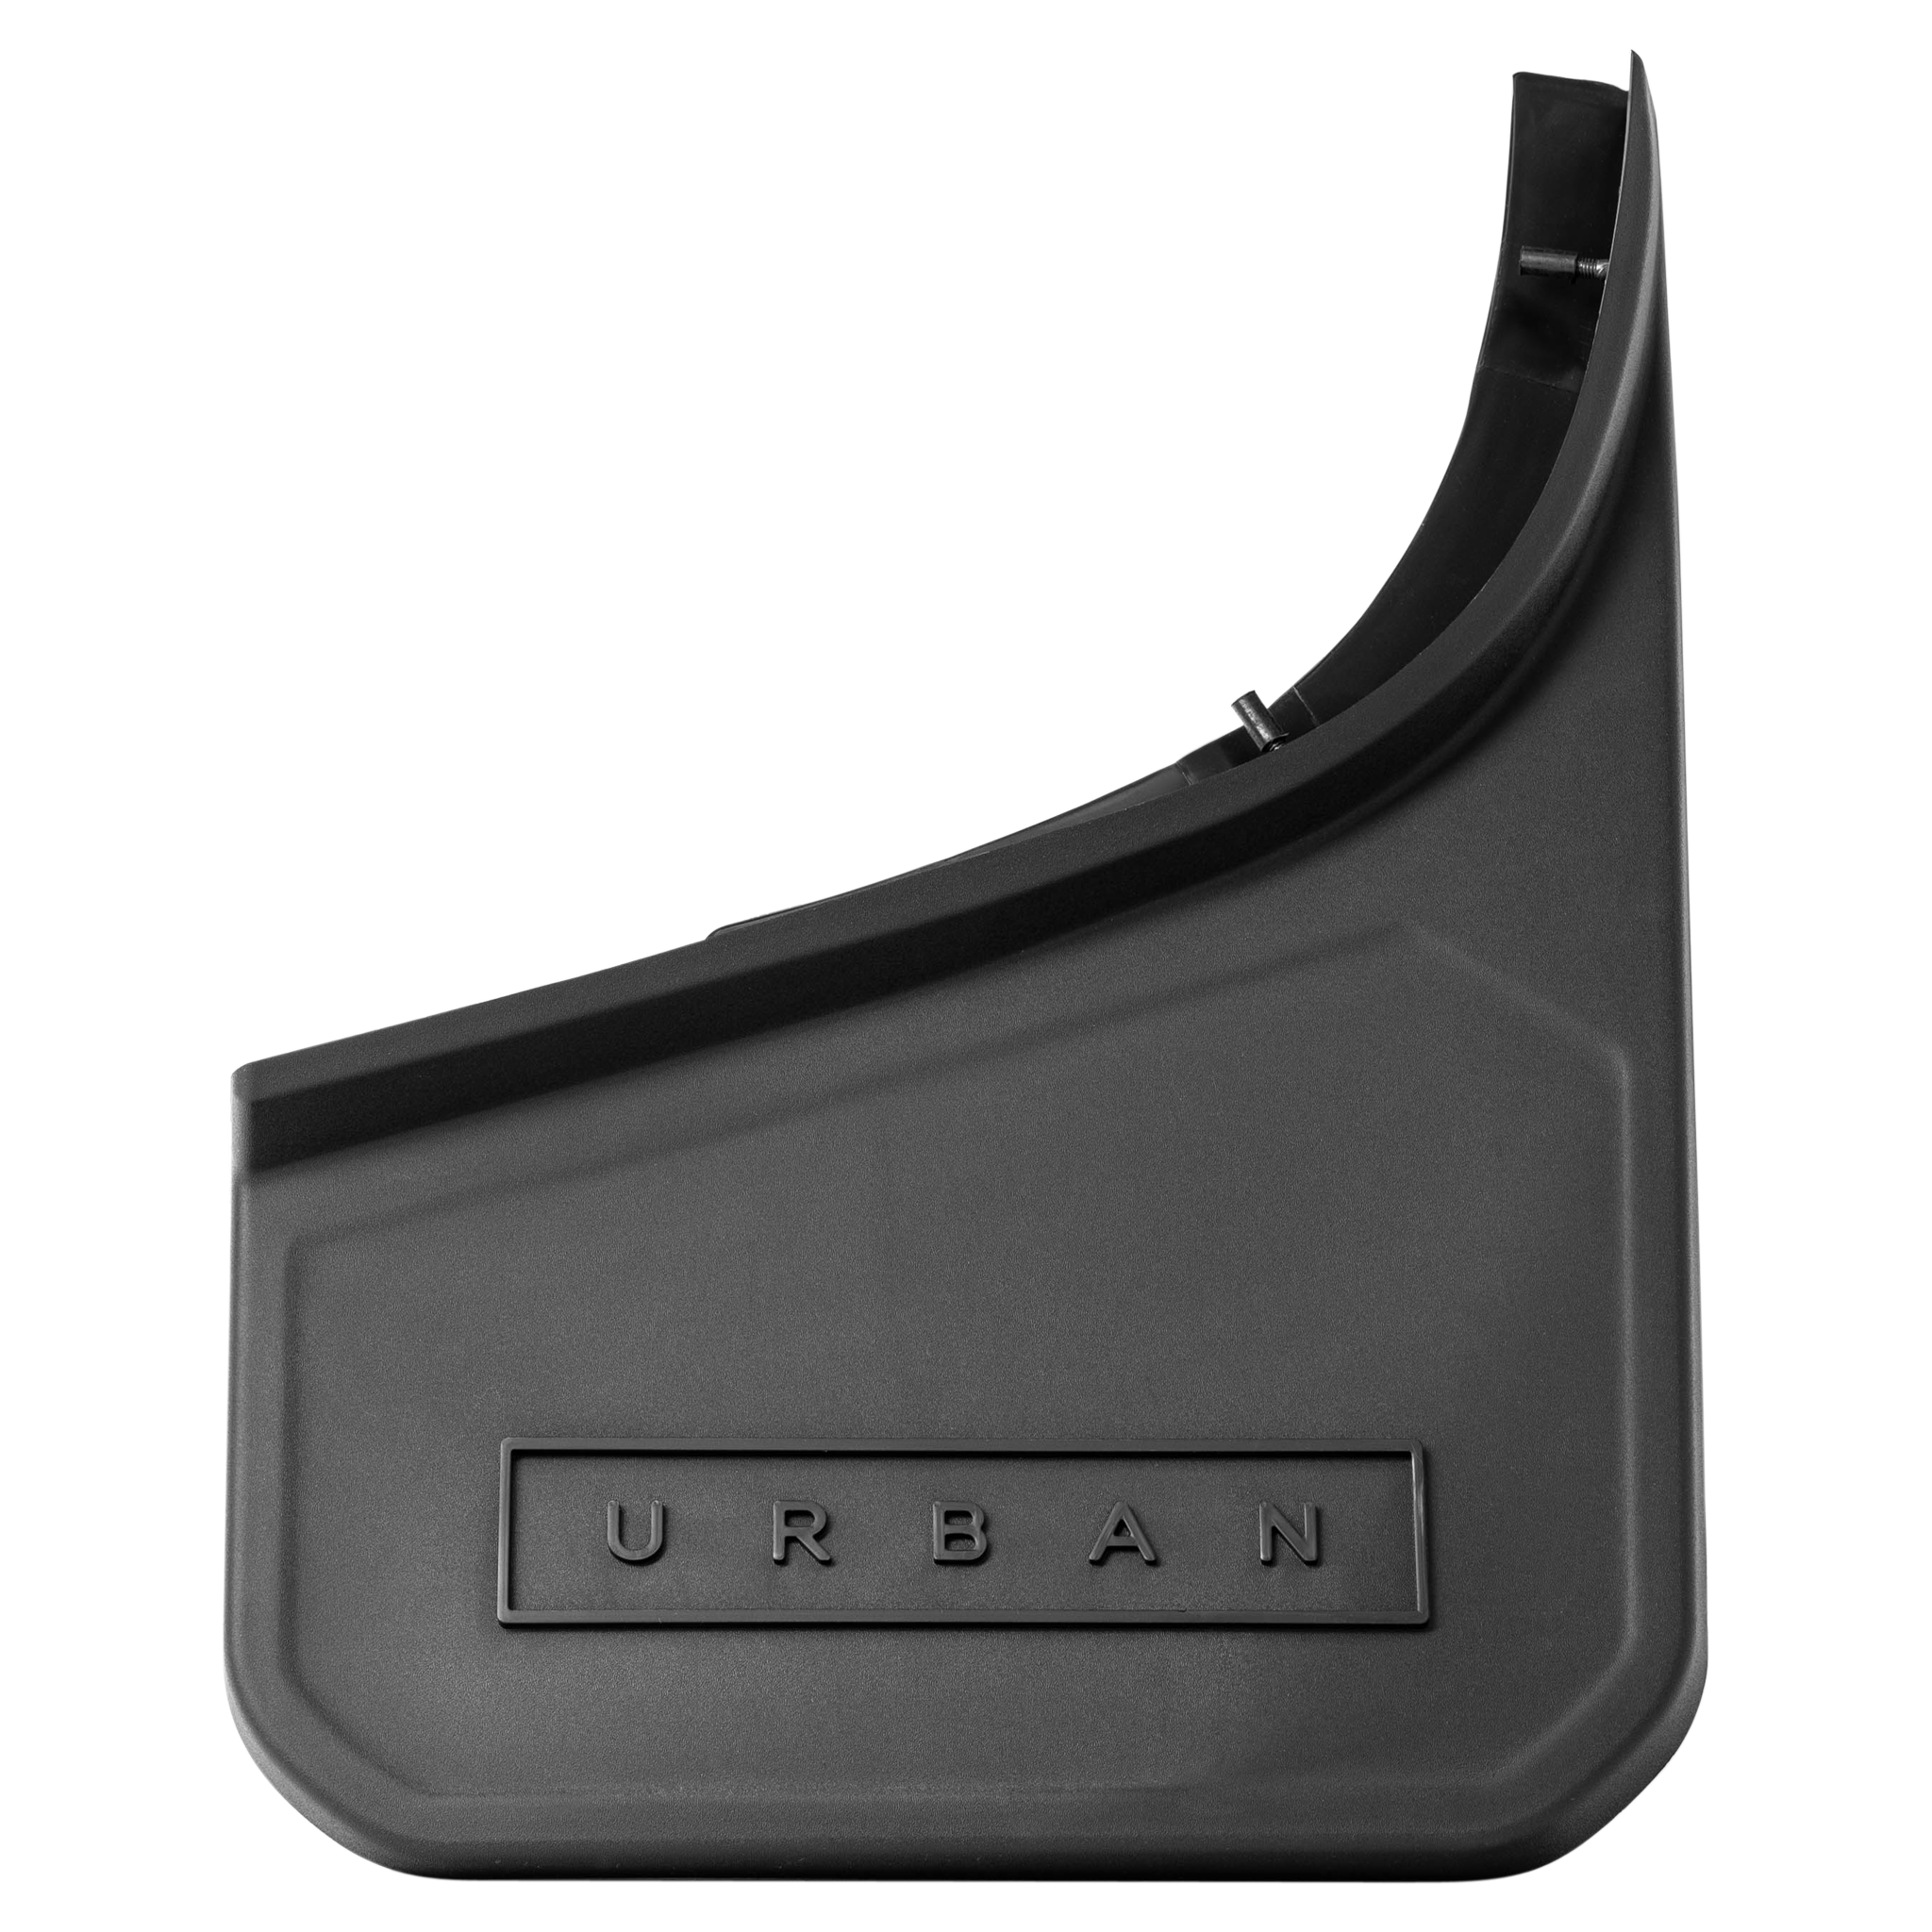 Urban Branded Mudflaps for New Land Rover Defender (Front & Rear)